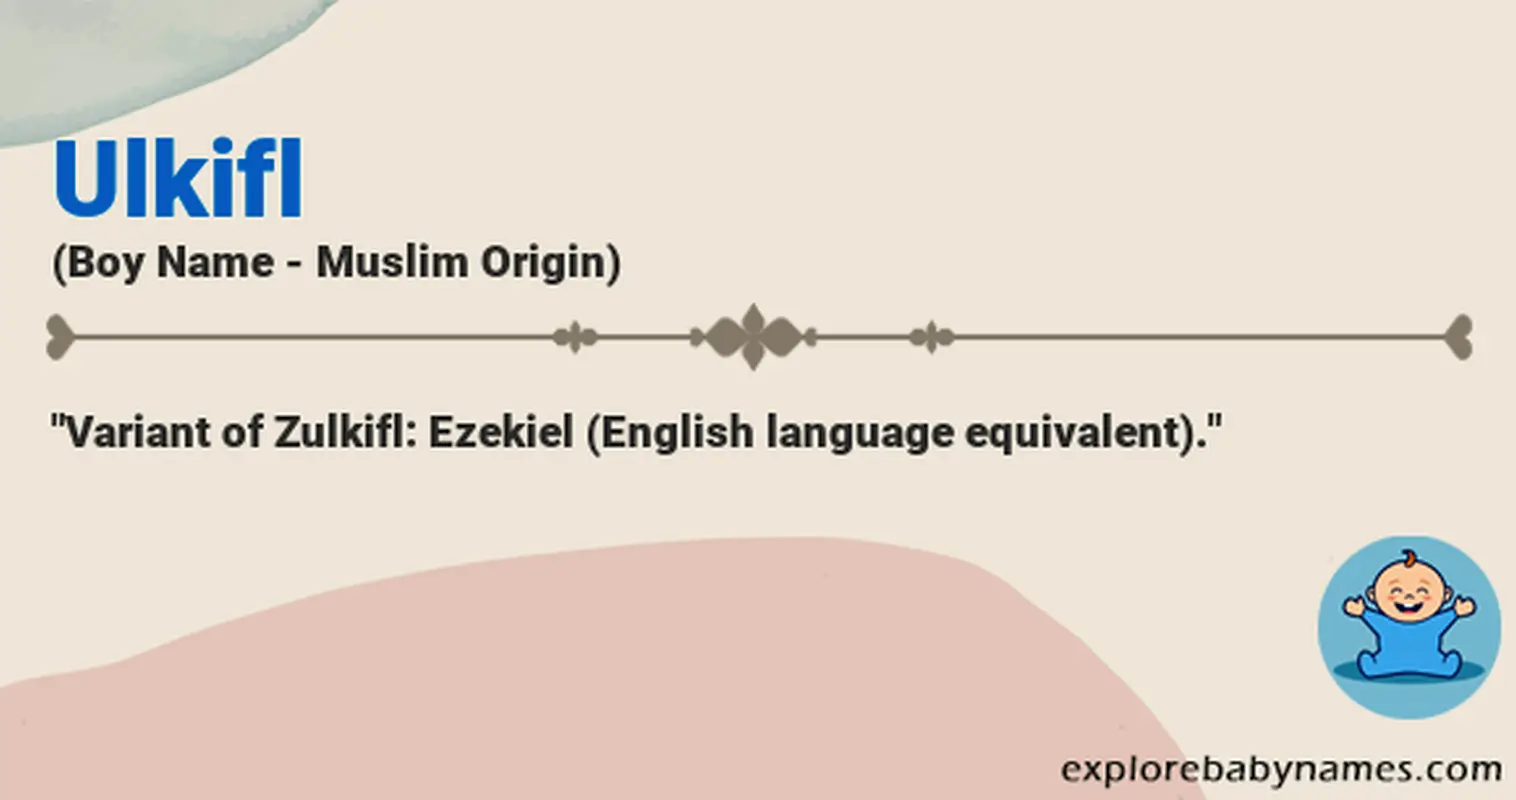 Meaning of Ulkifl